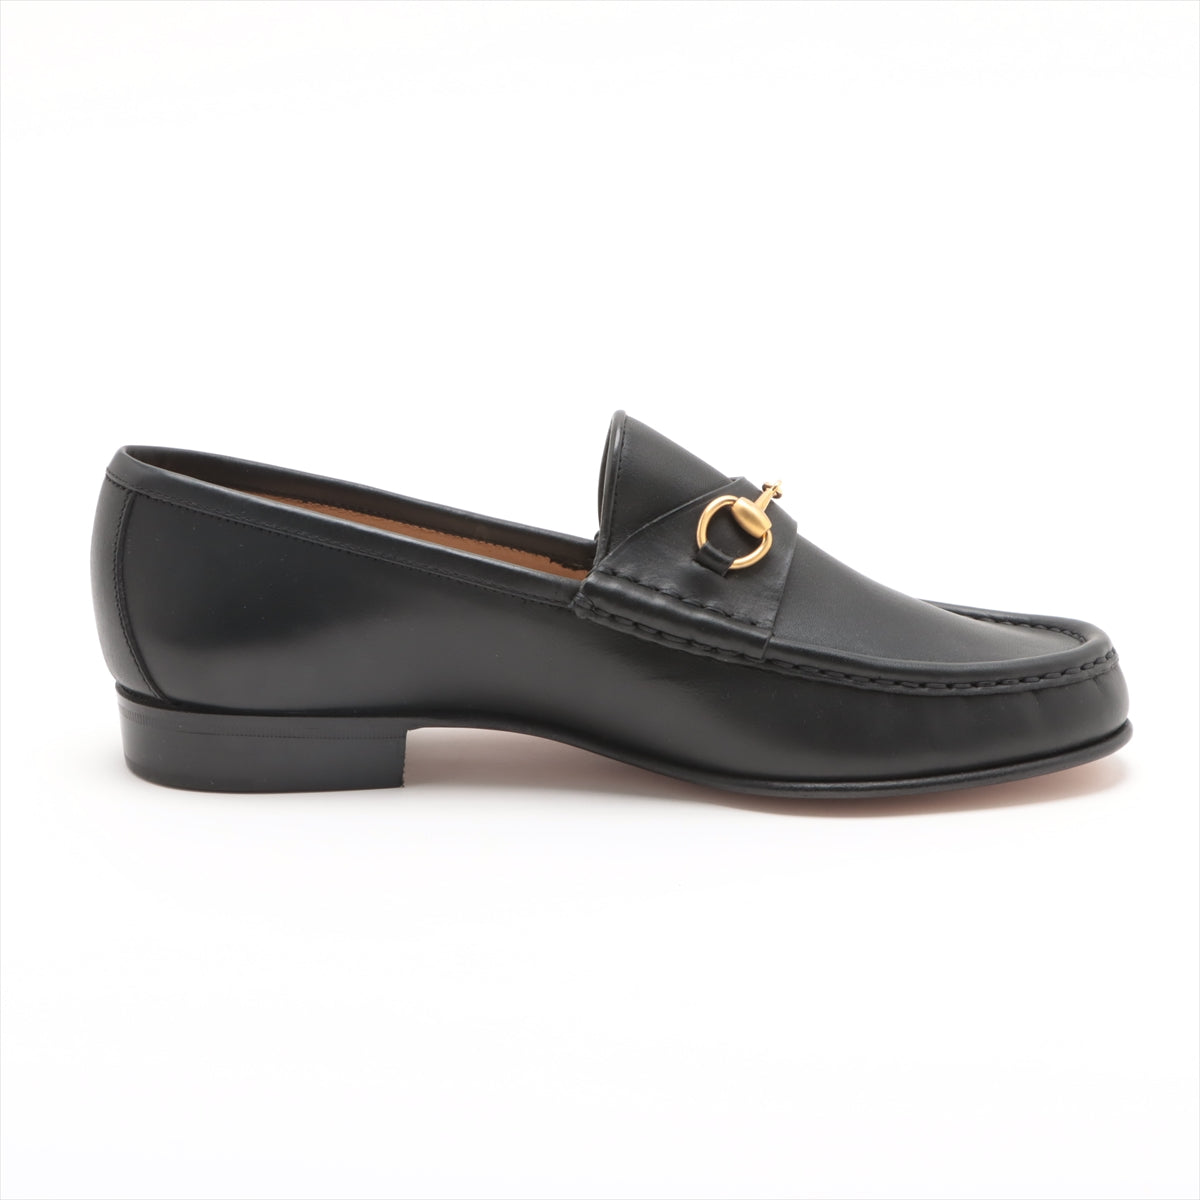 Gucci Leather Loafer 9 Ladies' Black 100 0255 Horse Bits